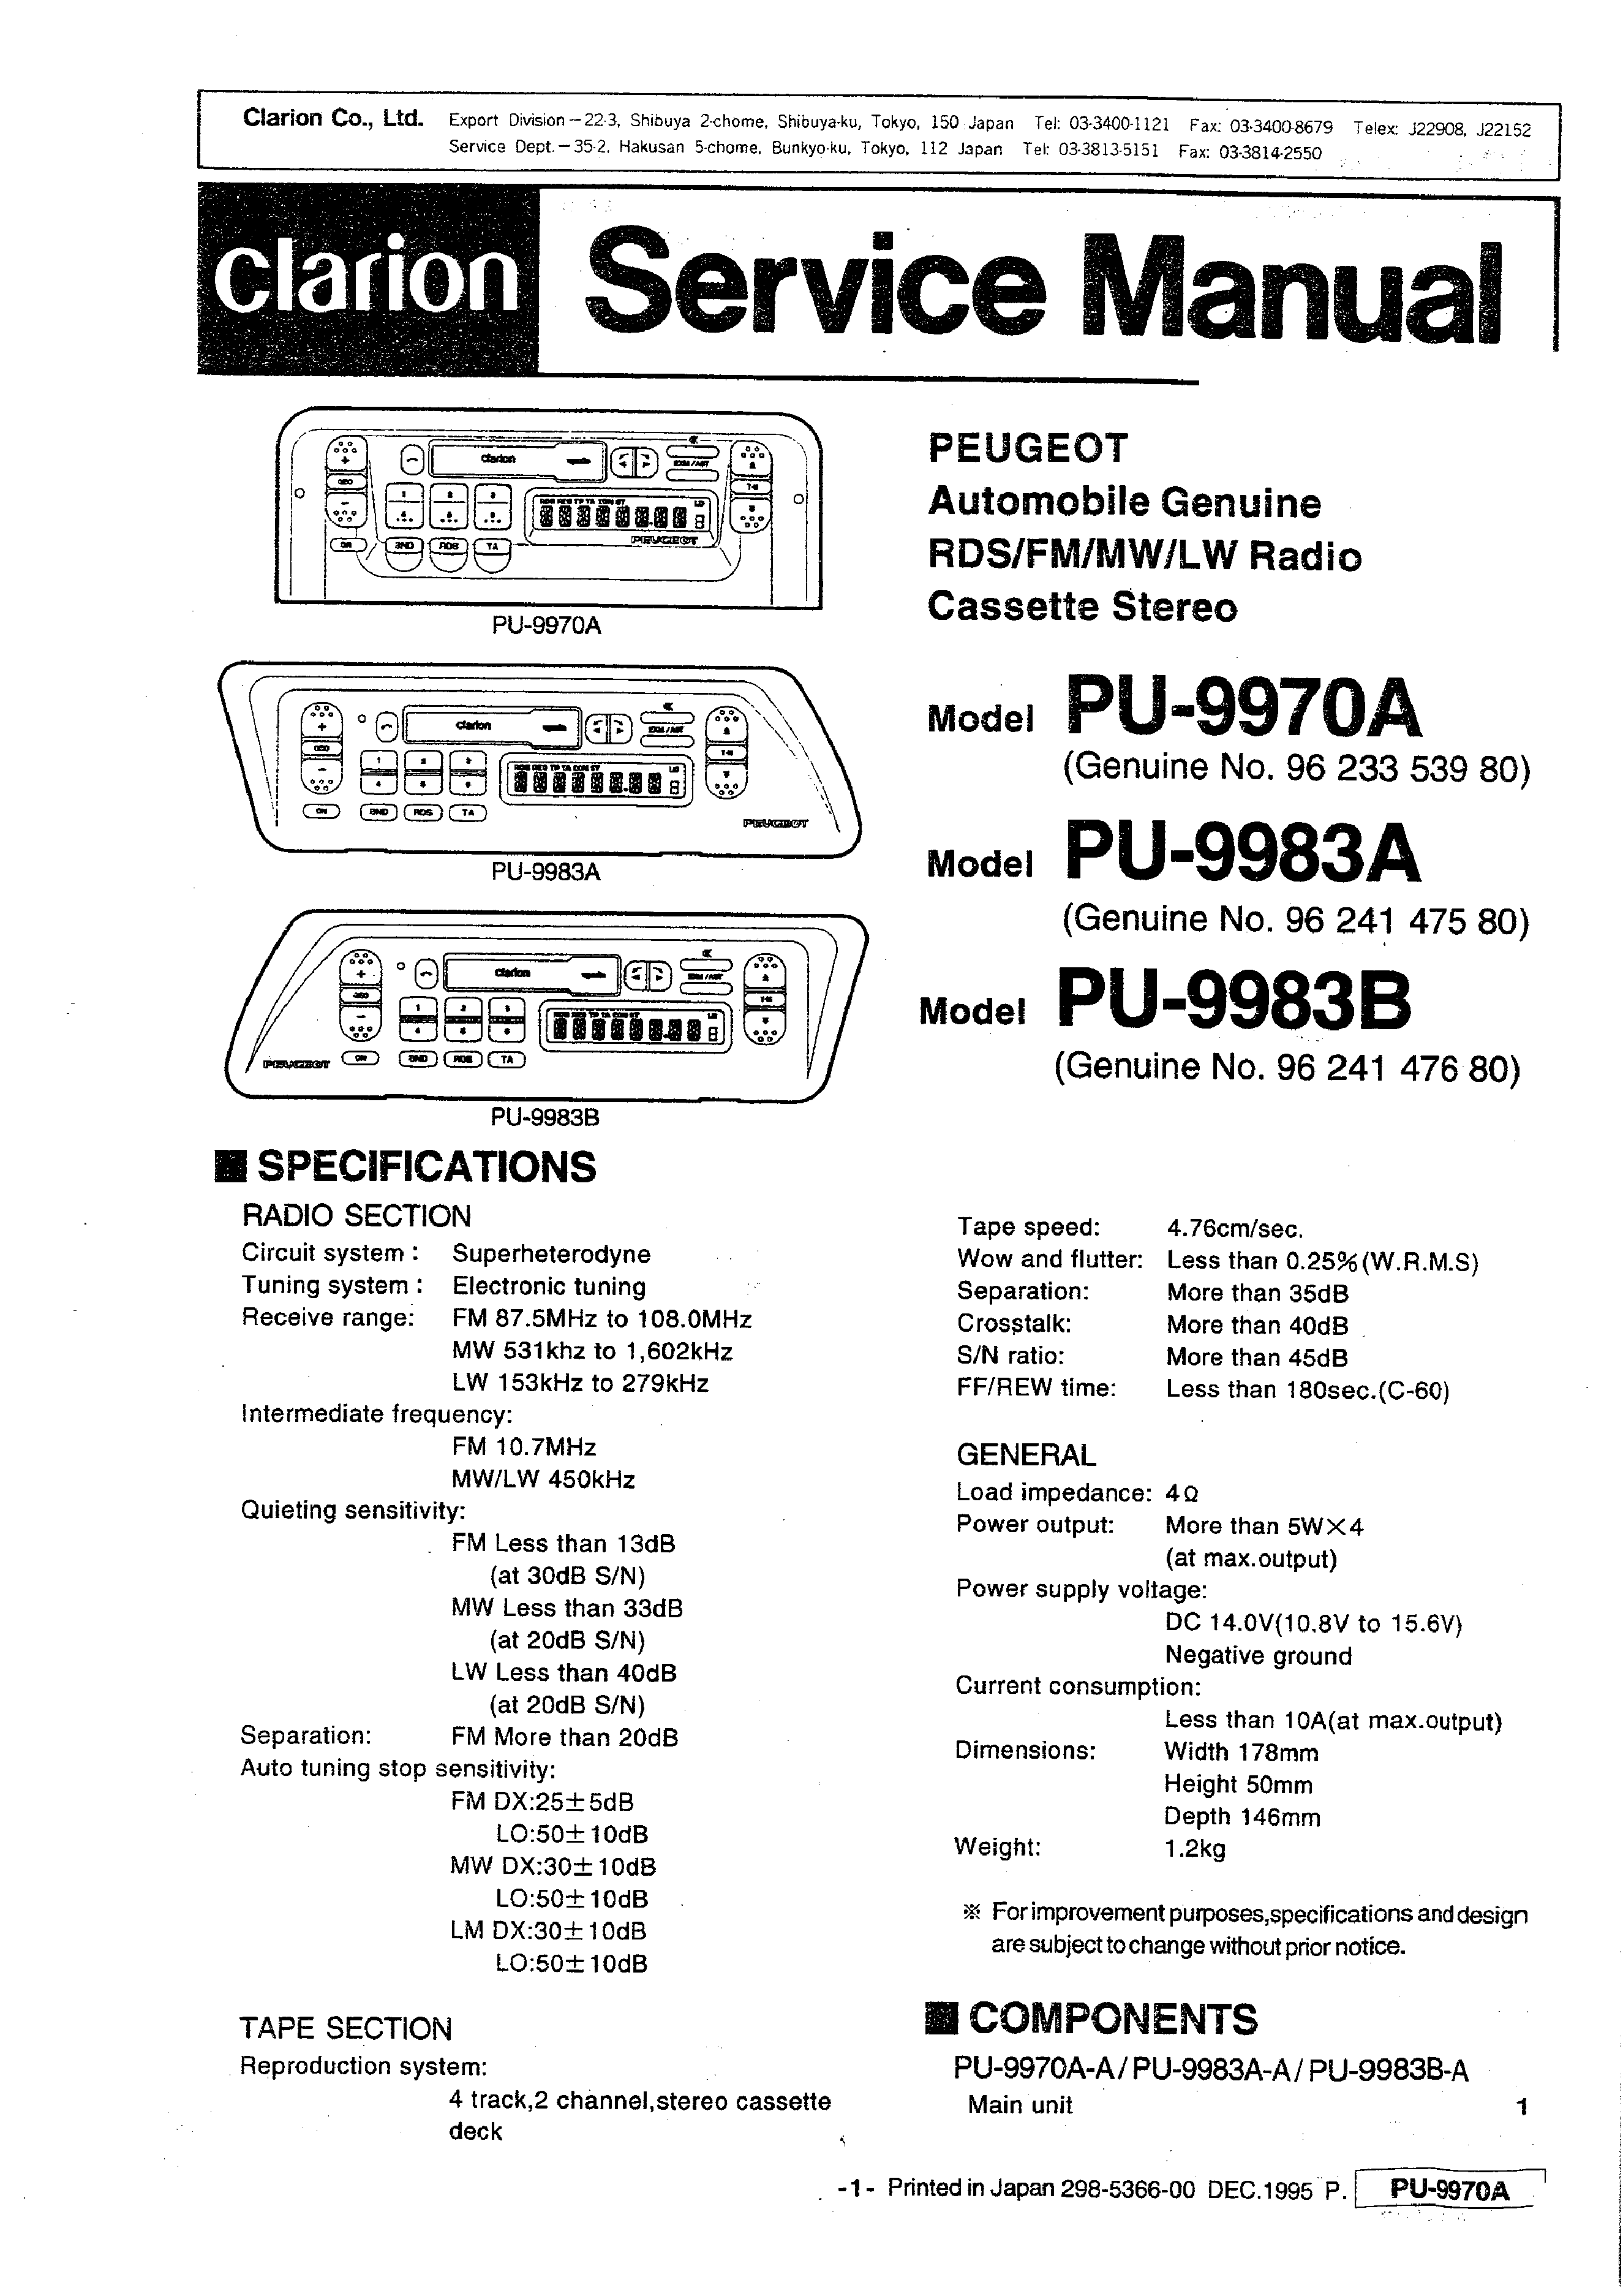 Service Manual For Clarion Pu9970a